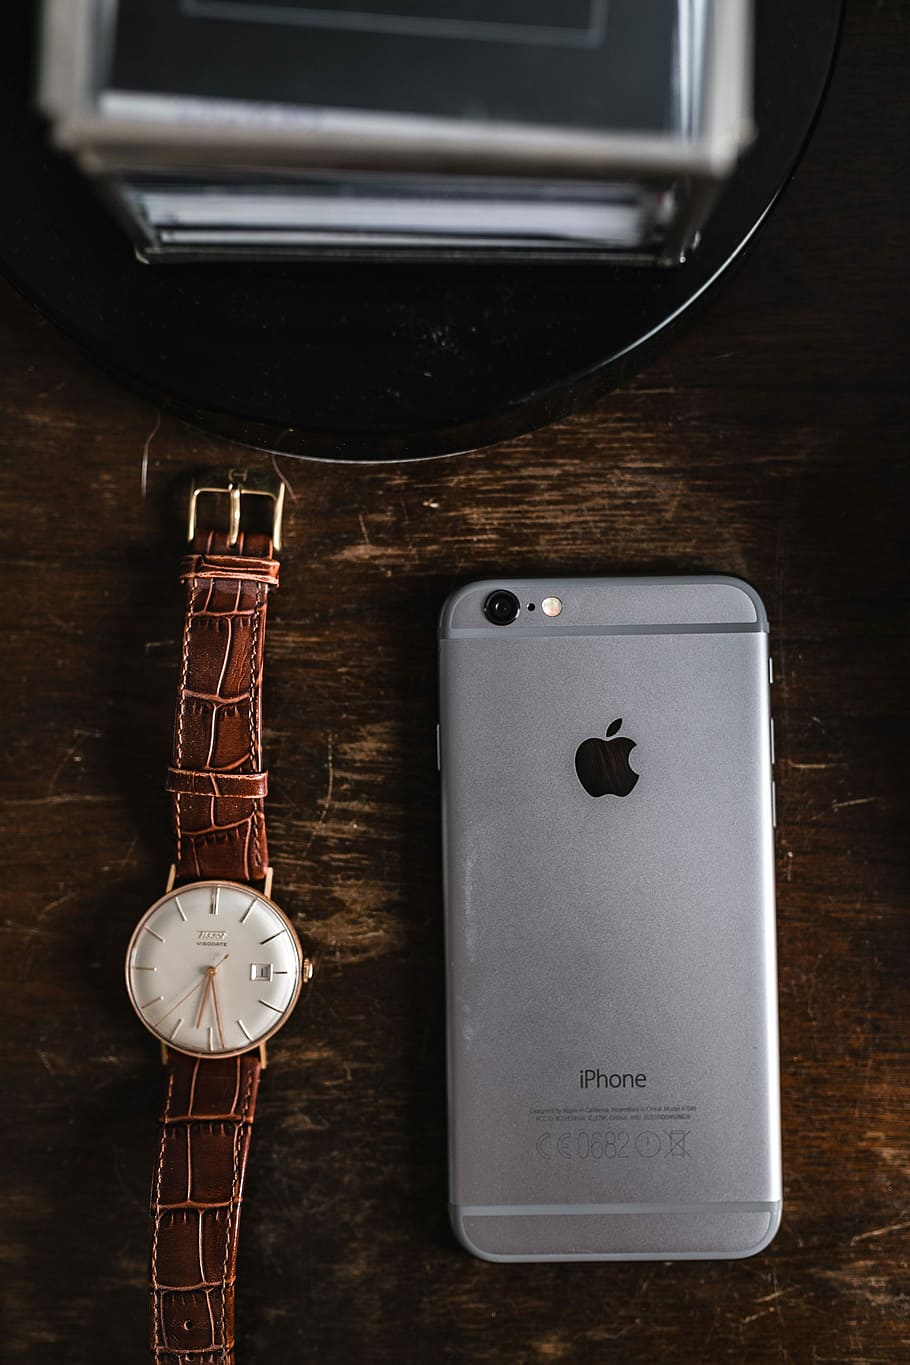 watch, brown, leather wallet, Apple iPhone 6, Vintage, leather, wallet, technology, iphone, iphone 6